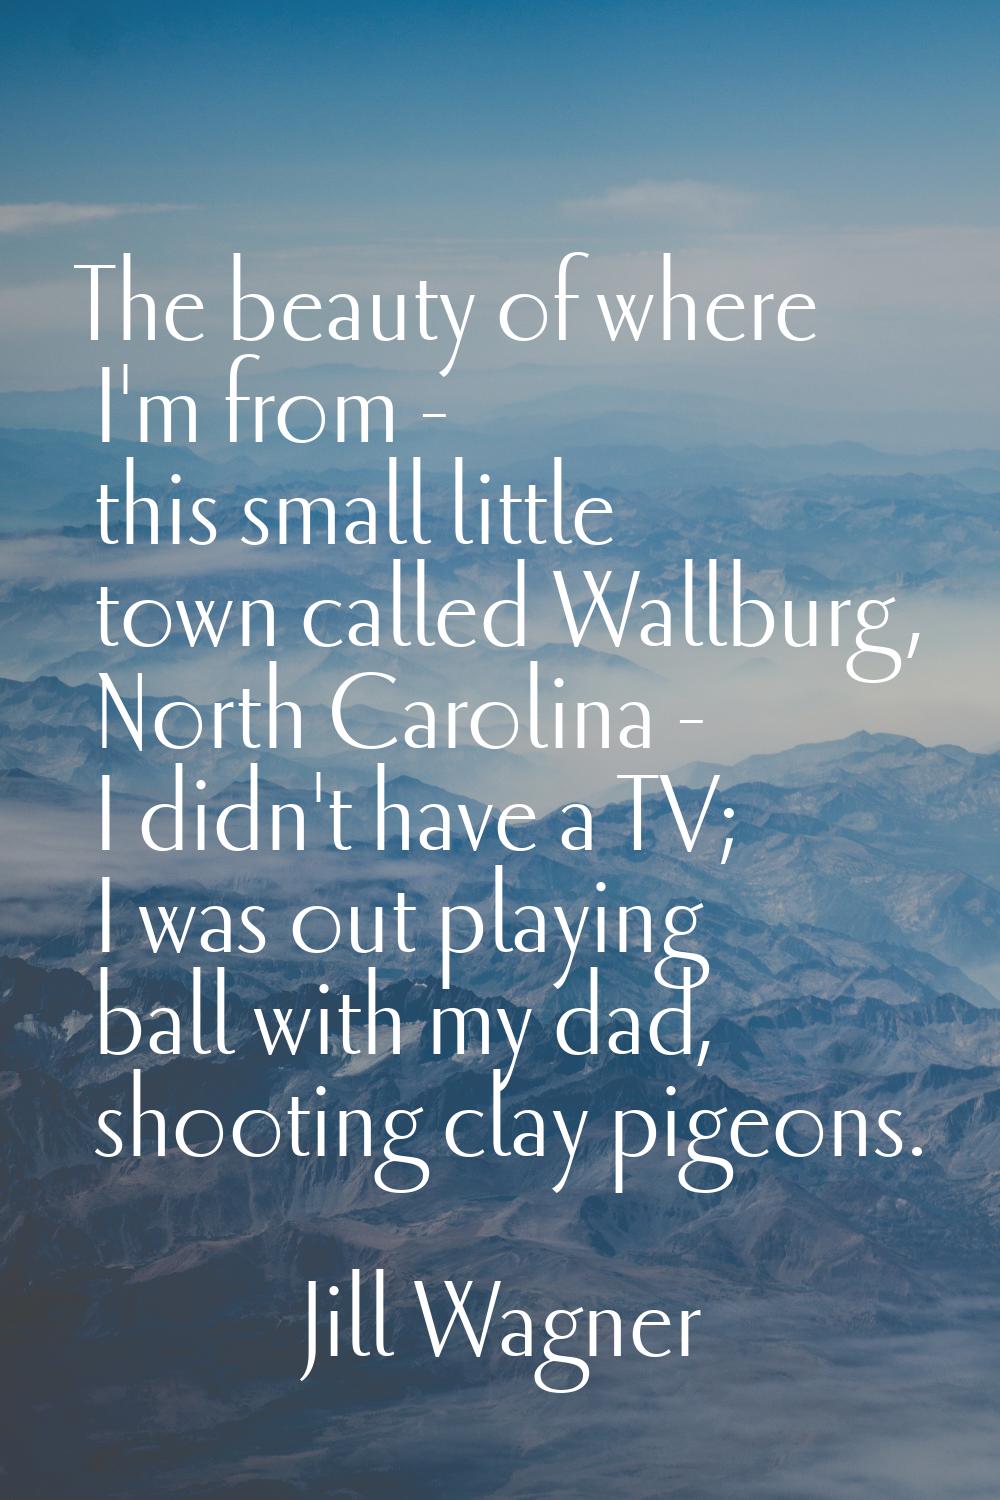 The beauty of where I'm from - this small little town called Wallburg, North Carolina - I didn't ha